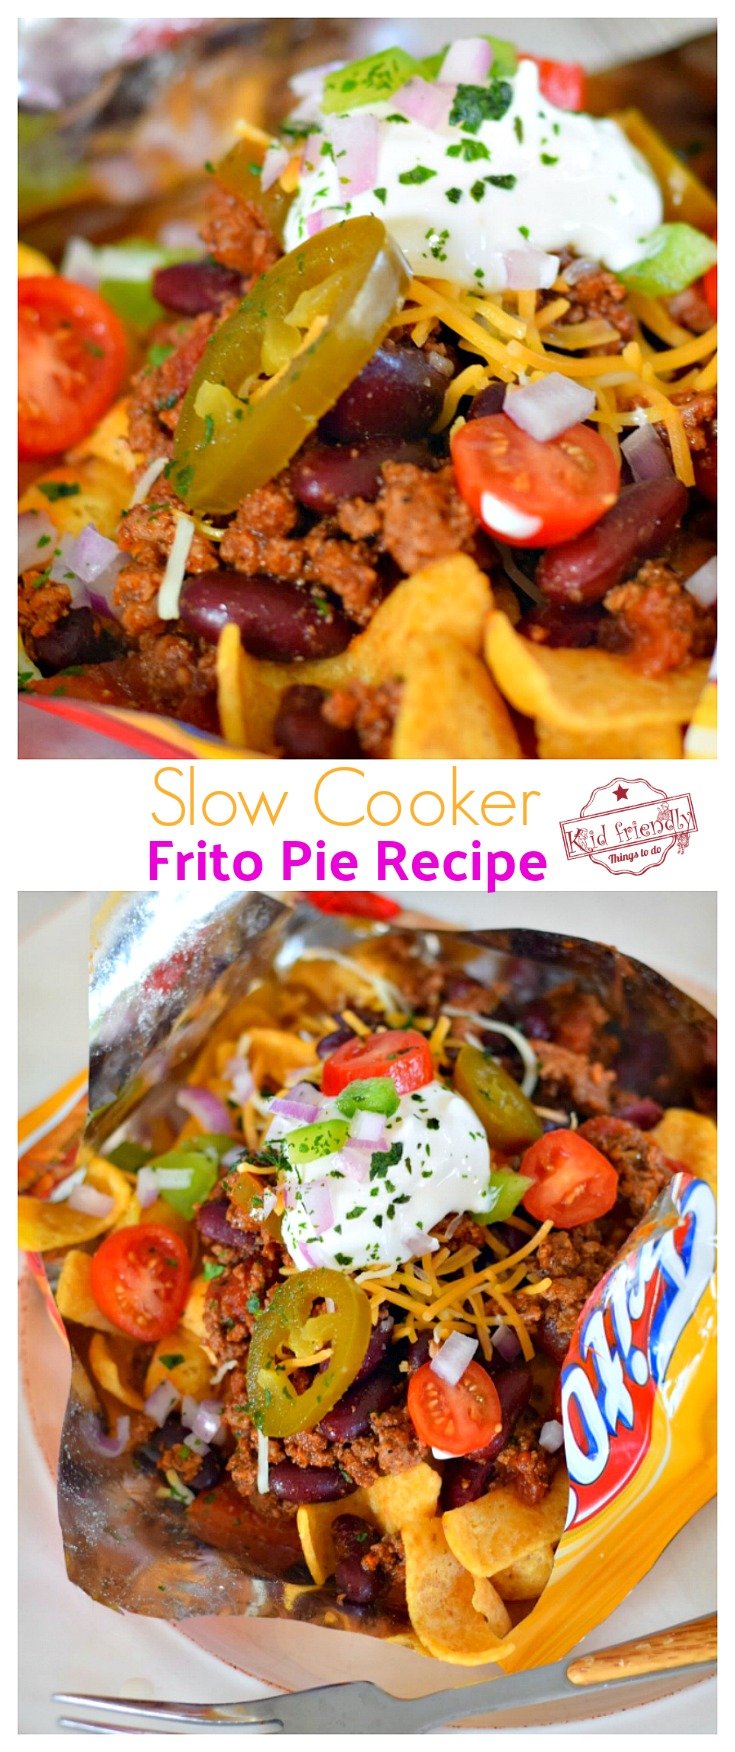 Slow Cooker Frito Pie Recipe with Chili Con Carne - Easy and so delicious. Perfect for game day, tailgating, or family dinner - www.kidfriendlythingstodo.com